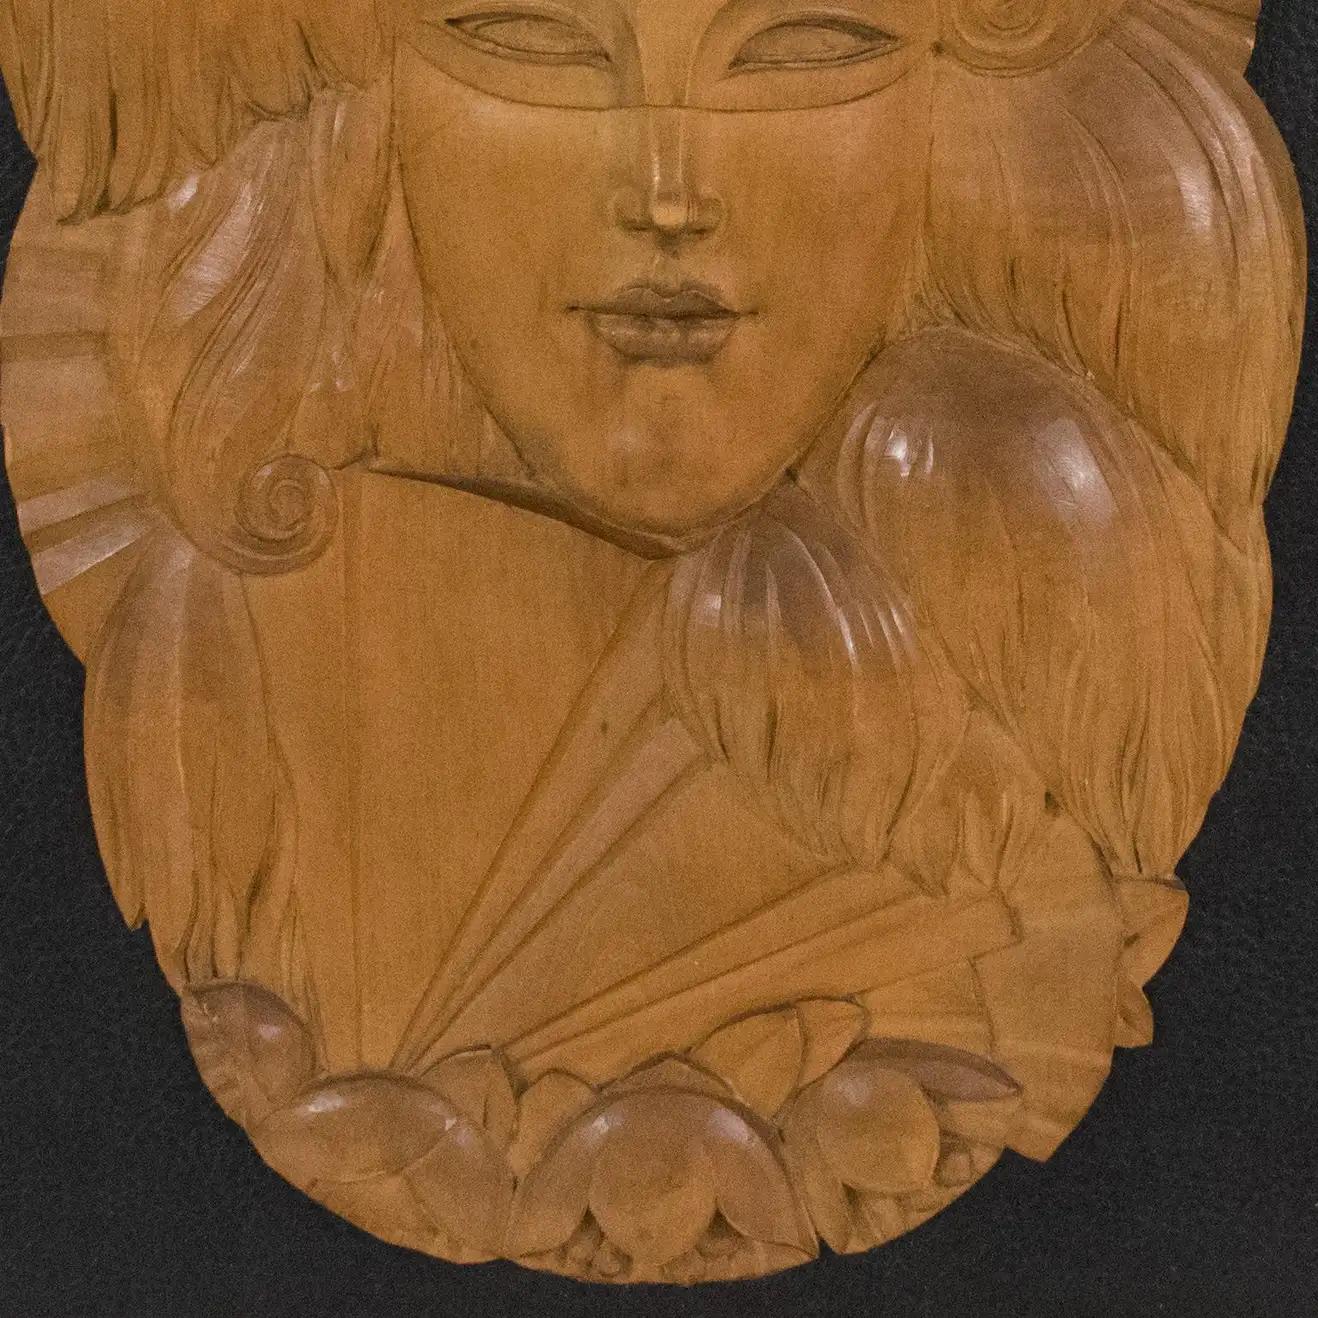 Art Deco Handcrafted Wood Panel Wall Sculpture Venetian Mask, 1930s For Sale 5